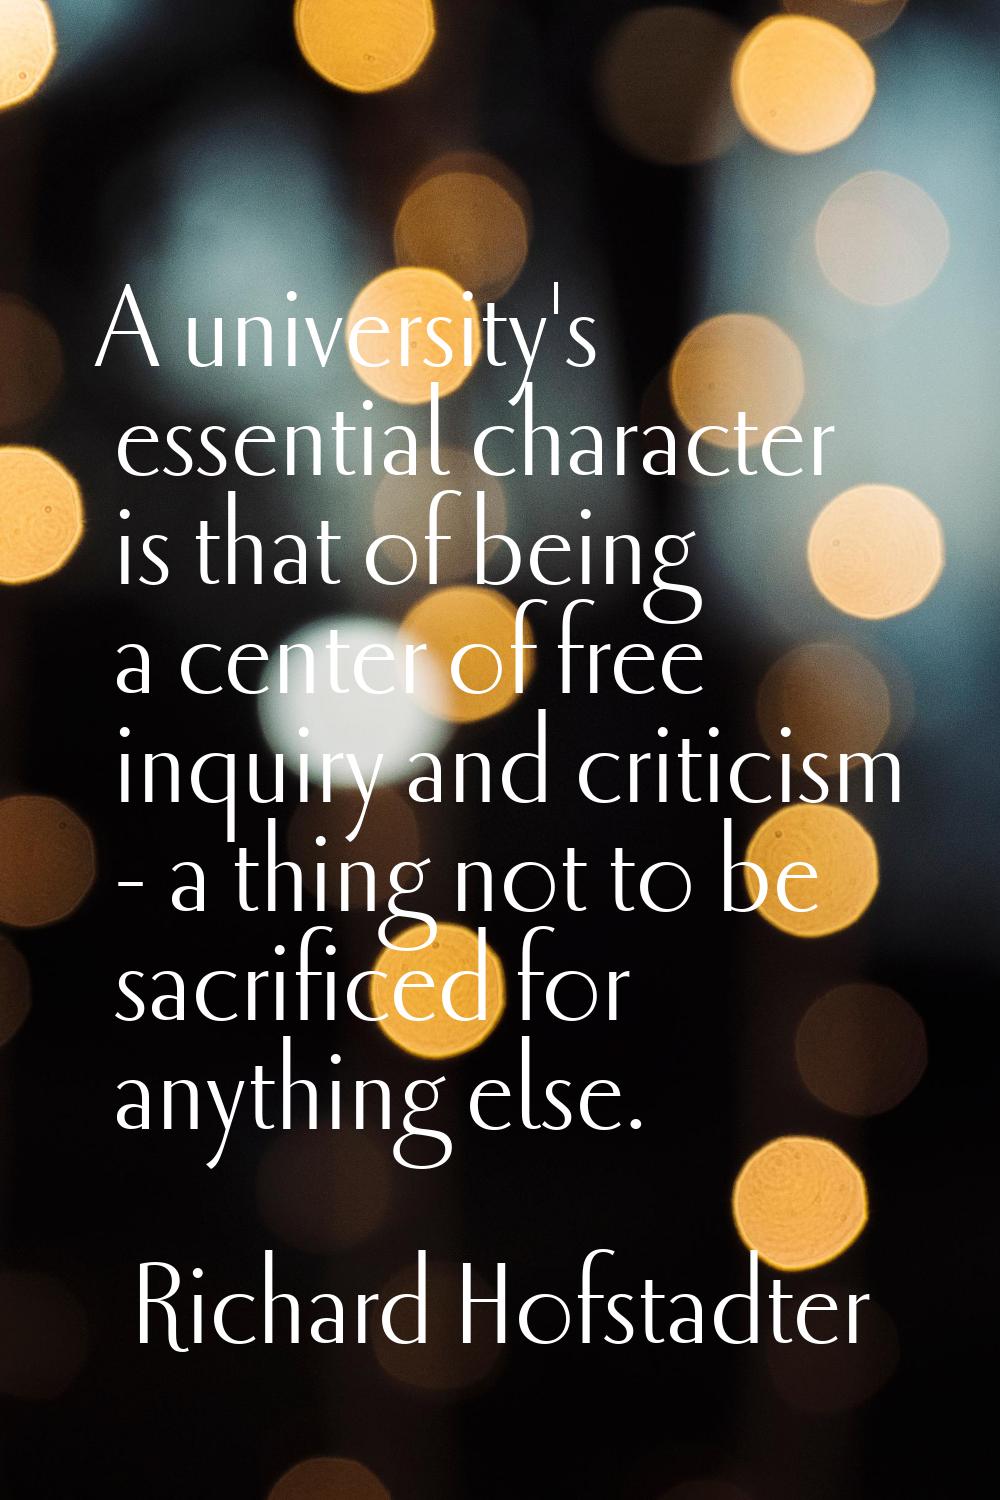 A university's essential character is that of being a center of free inquiry and criticism - a thin